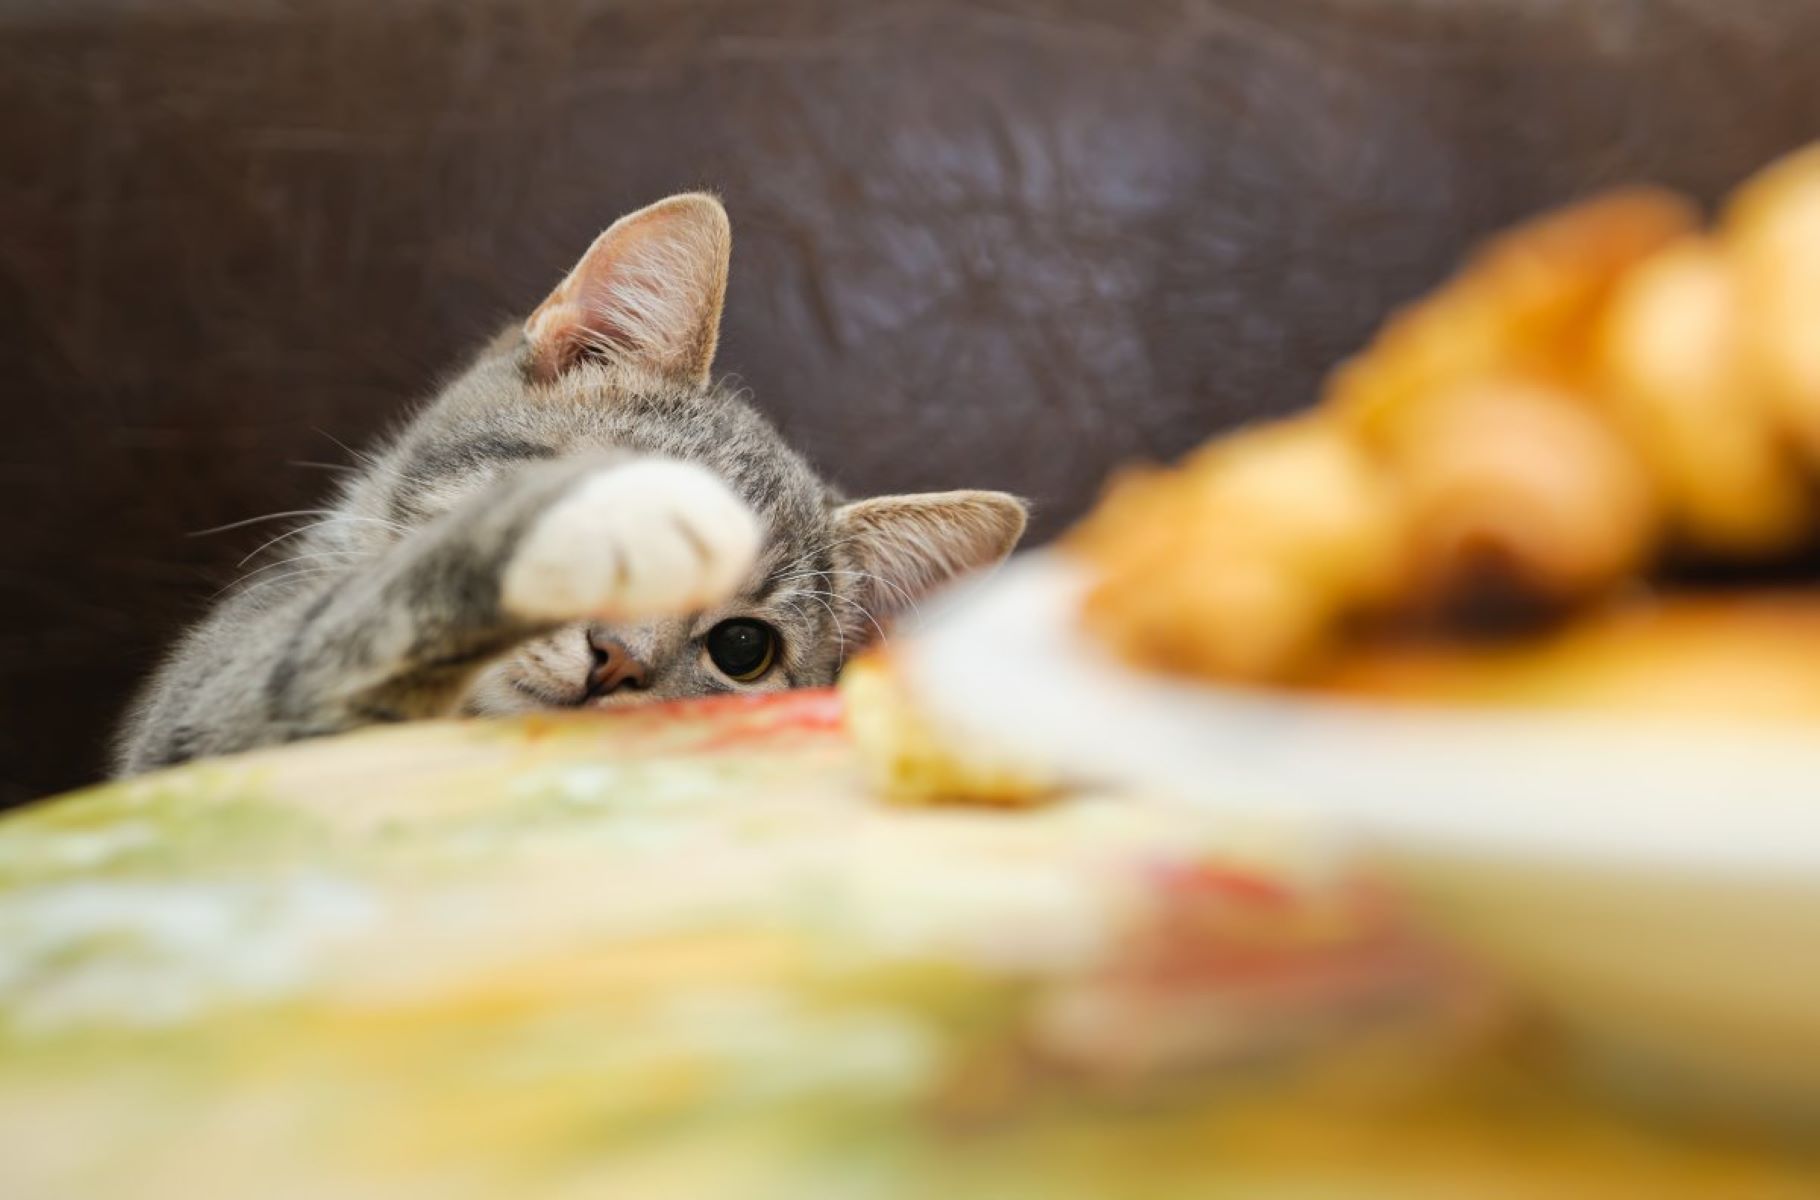 The Secret Behind Cats’ Muffin-Making Obsession Revealed!